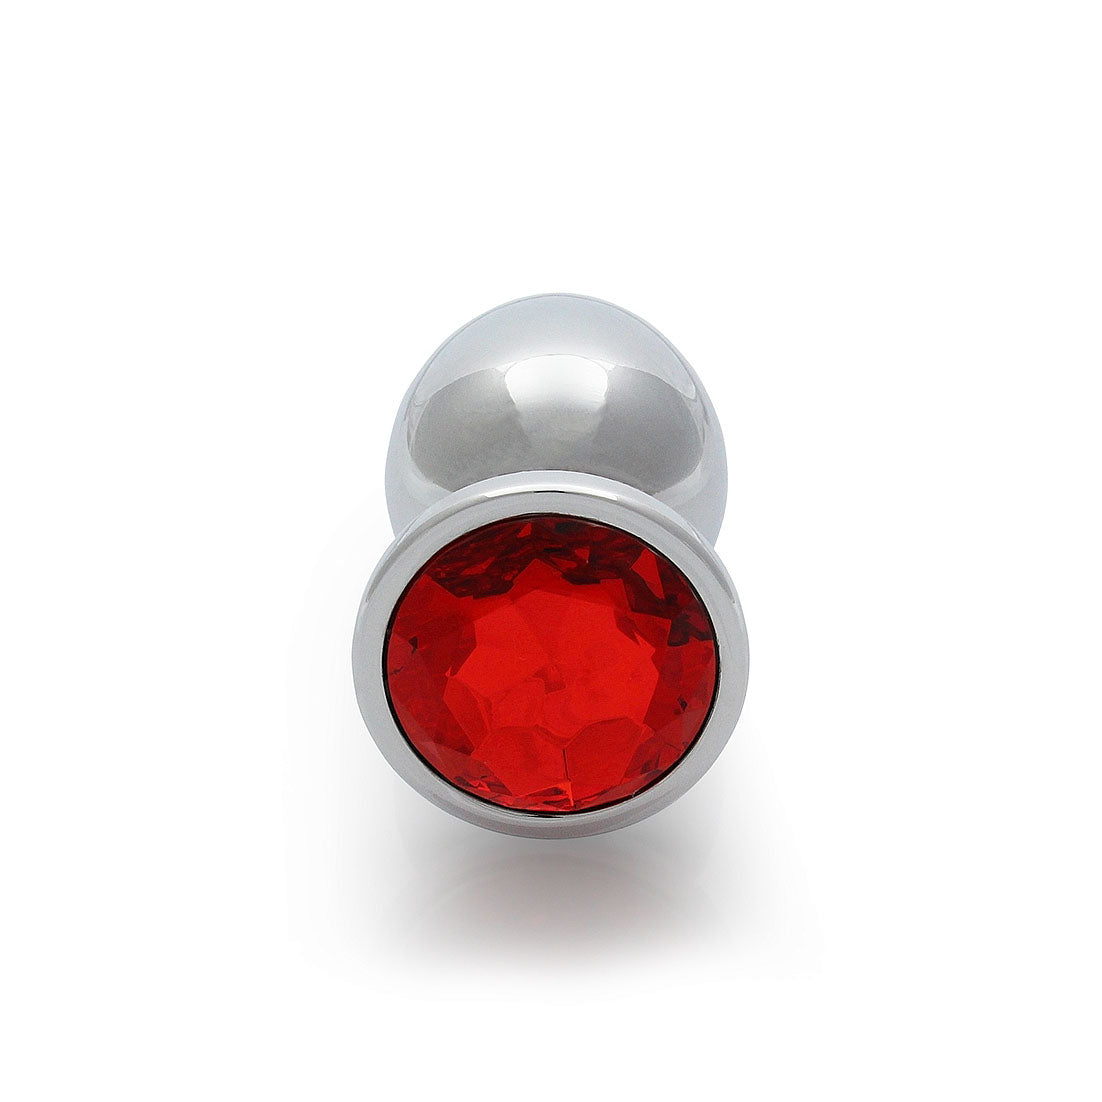 Round Gem Butt Plug - Large, Ruby Red